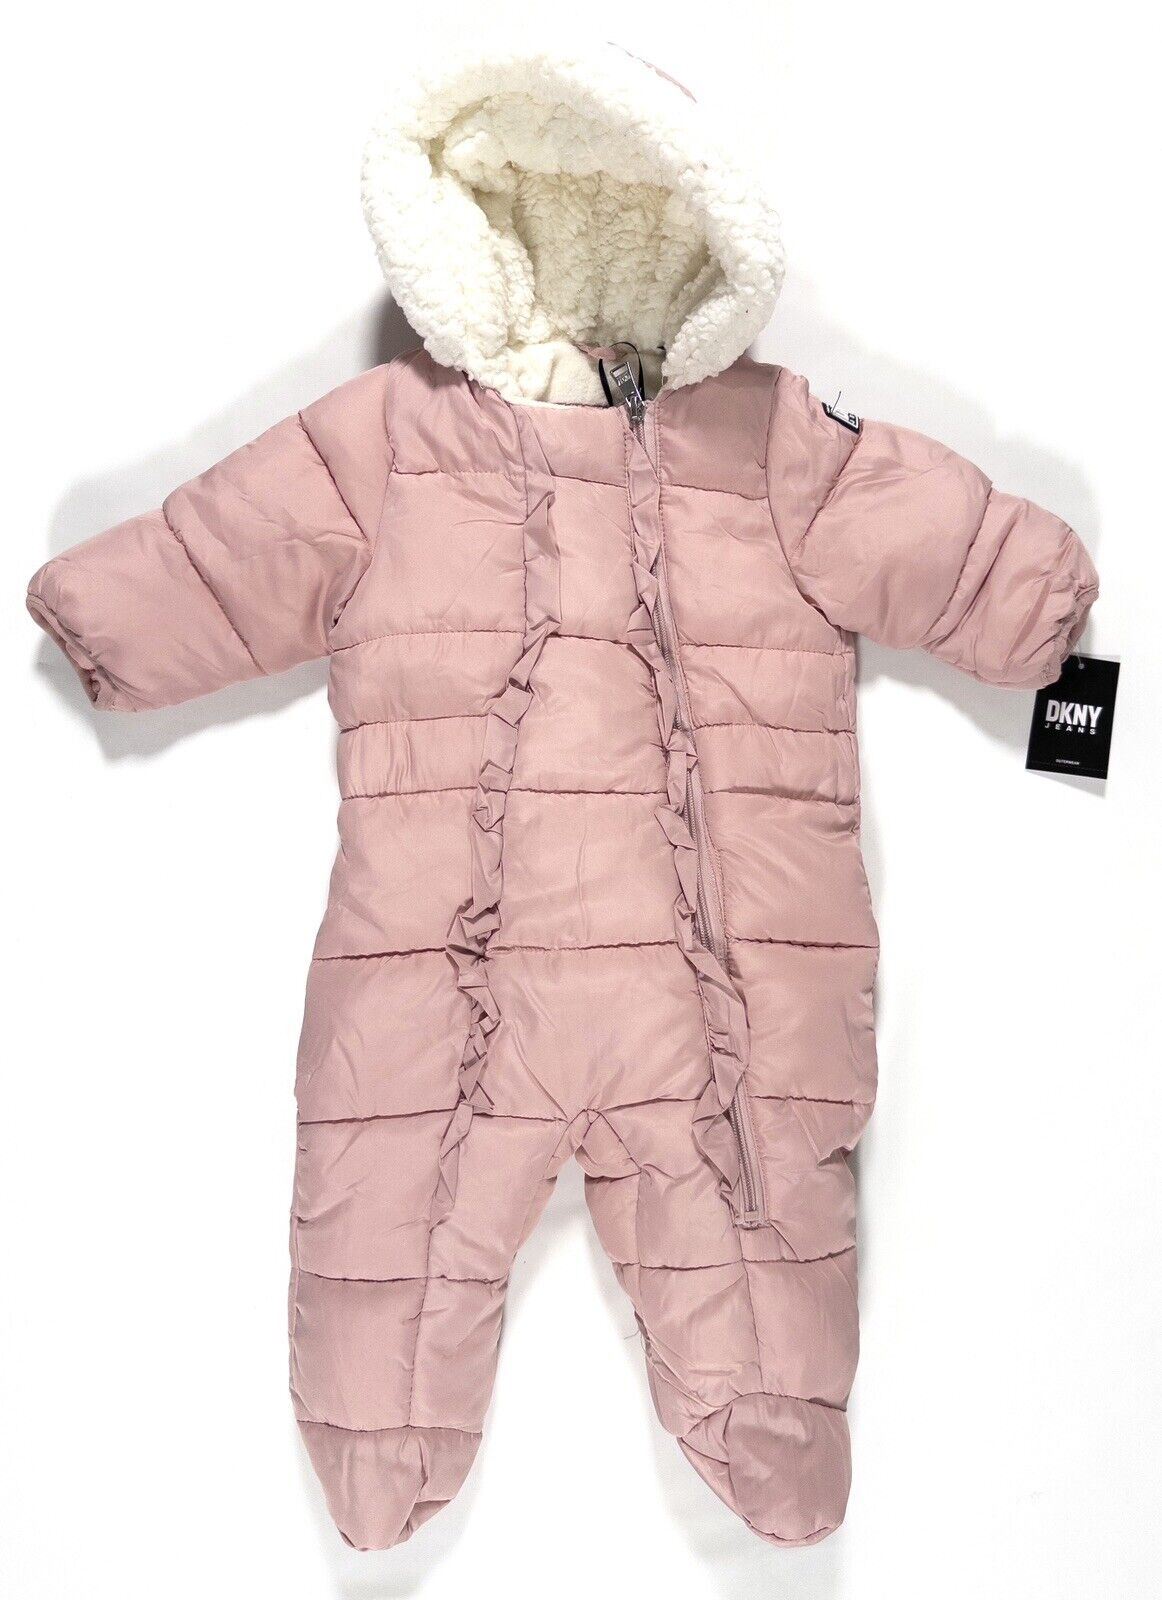 DKNY JEANS Baby Girls Pink Hooded Snowsuit All in one Size UK 6-9 Months